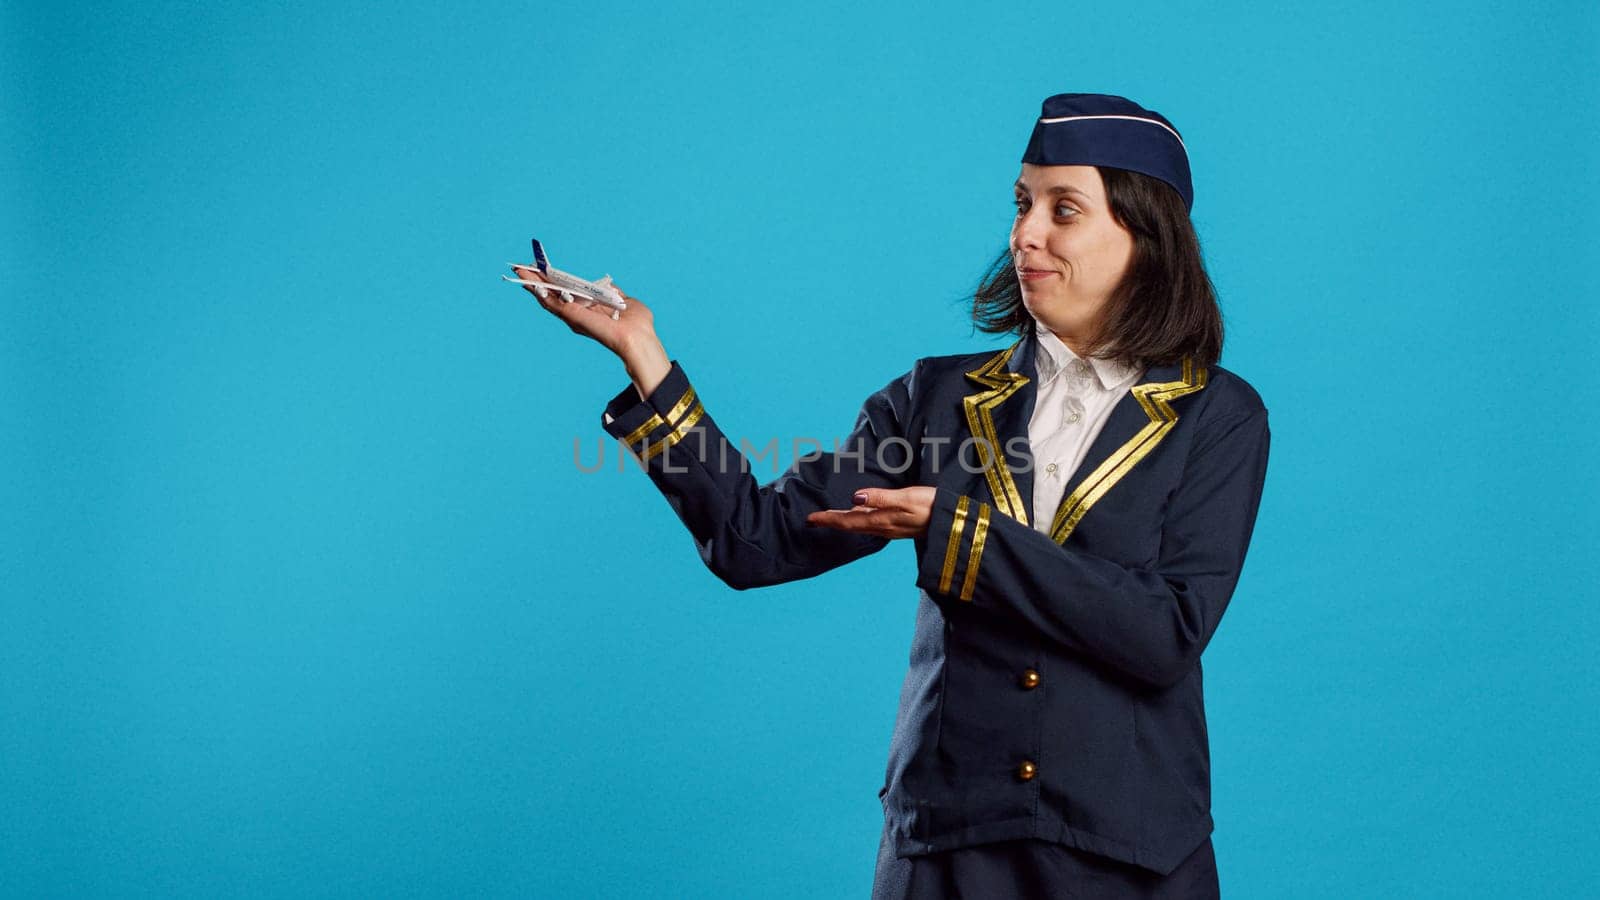 Smiling stewardess showing artificial plane toy by DCStudio